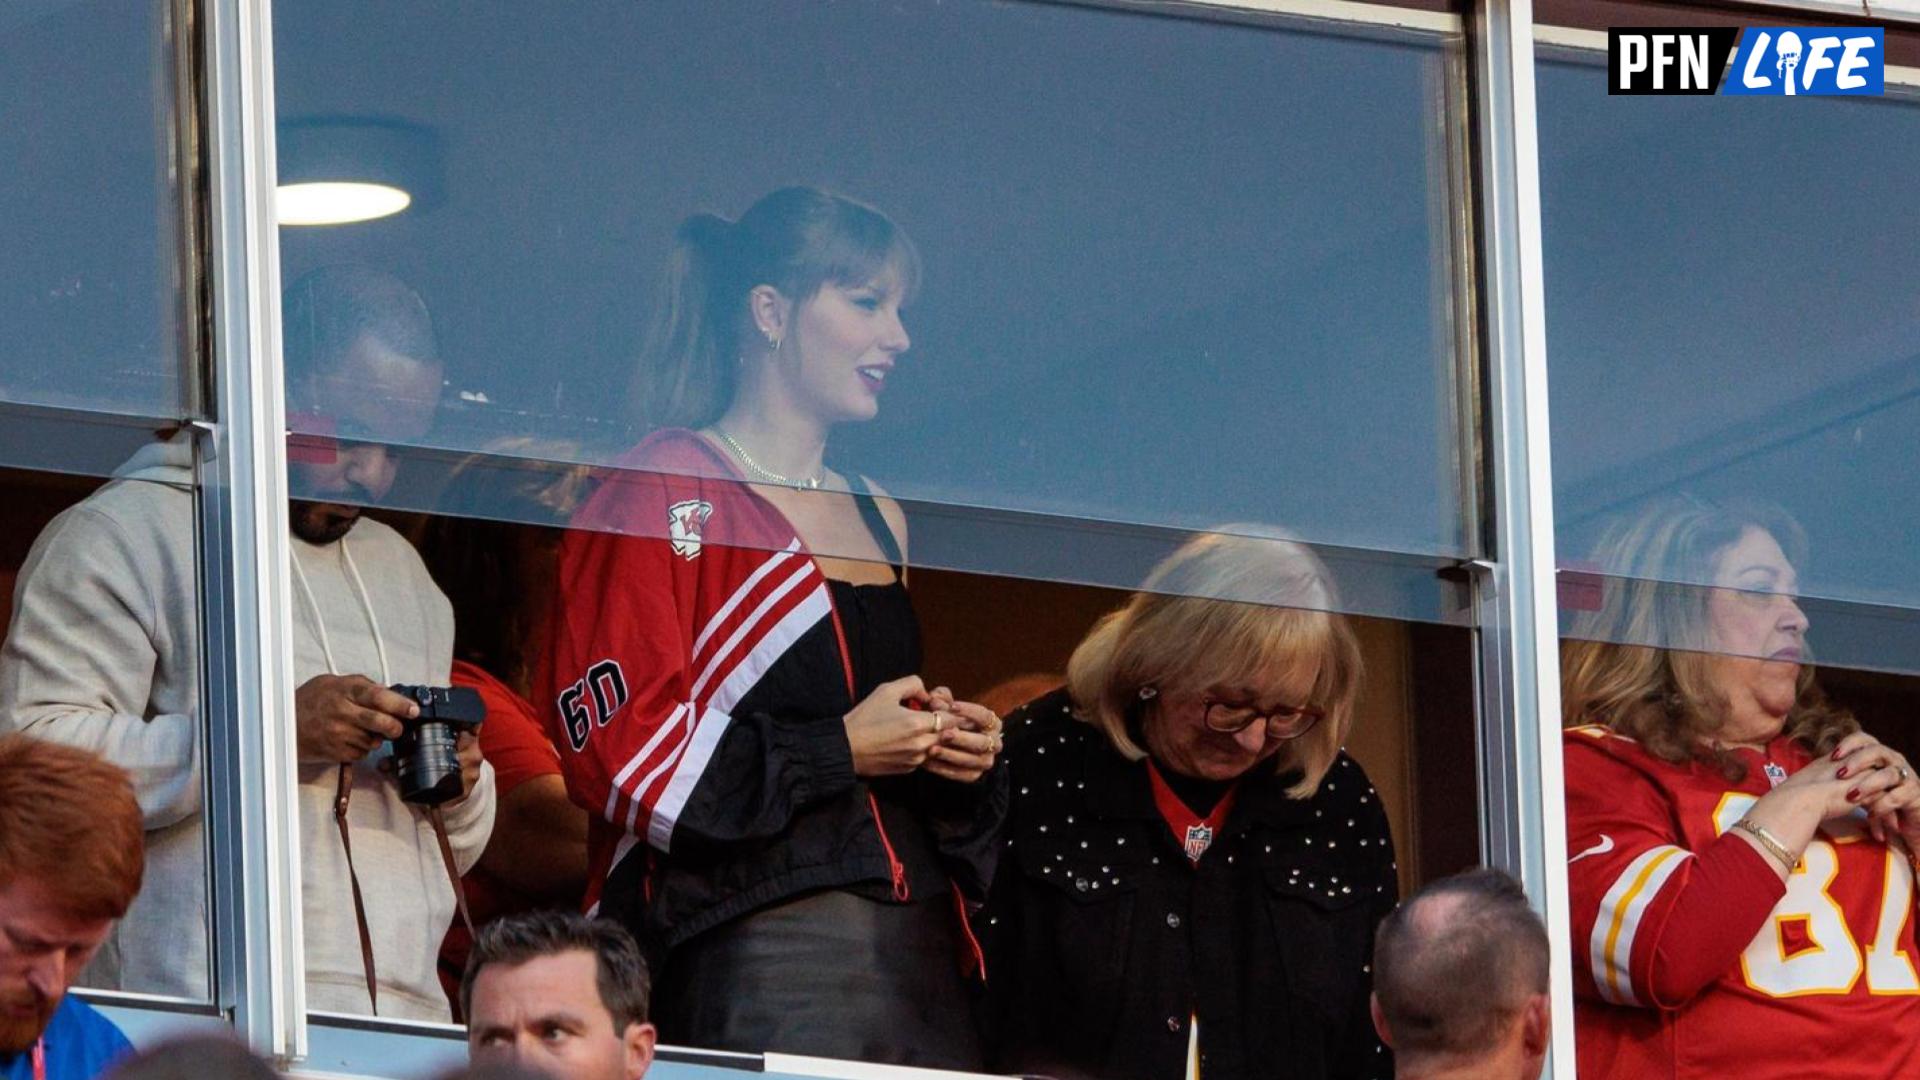 Grammy award winning artist Taylor Swift watches Kansas City Chiefs take the field along with Kansas City Chiefs tight end Travis Kelce (87) mom Donna Kelce prior to the game against the Denver Broncos.